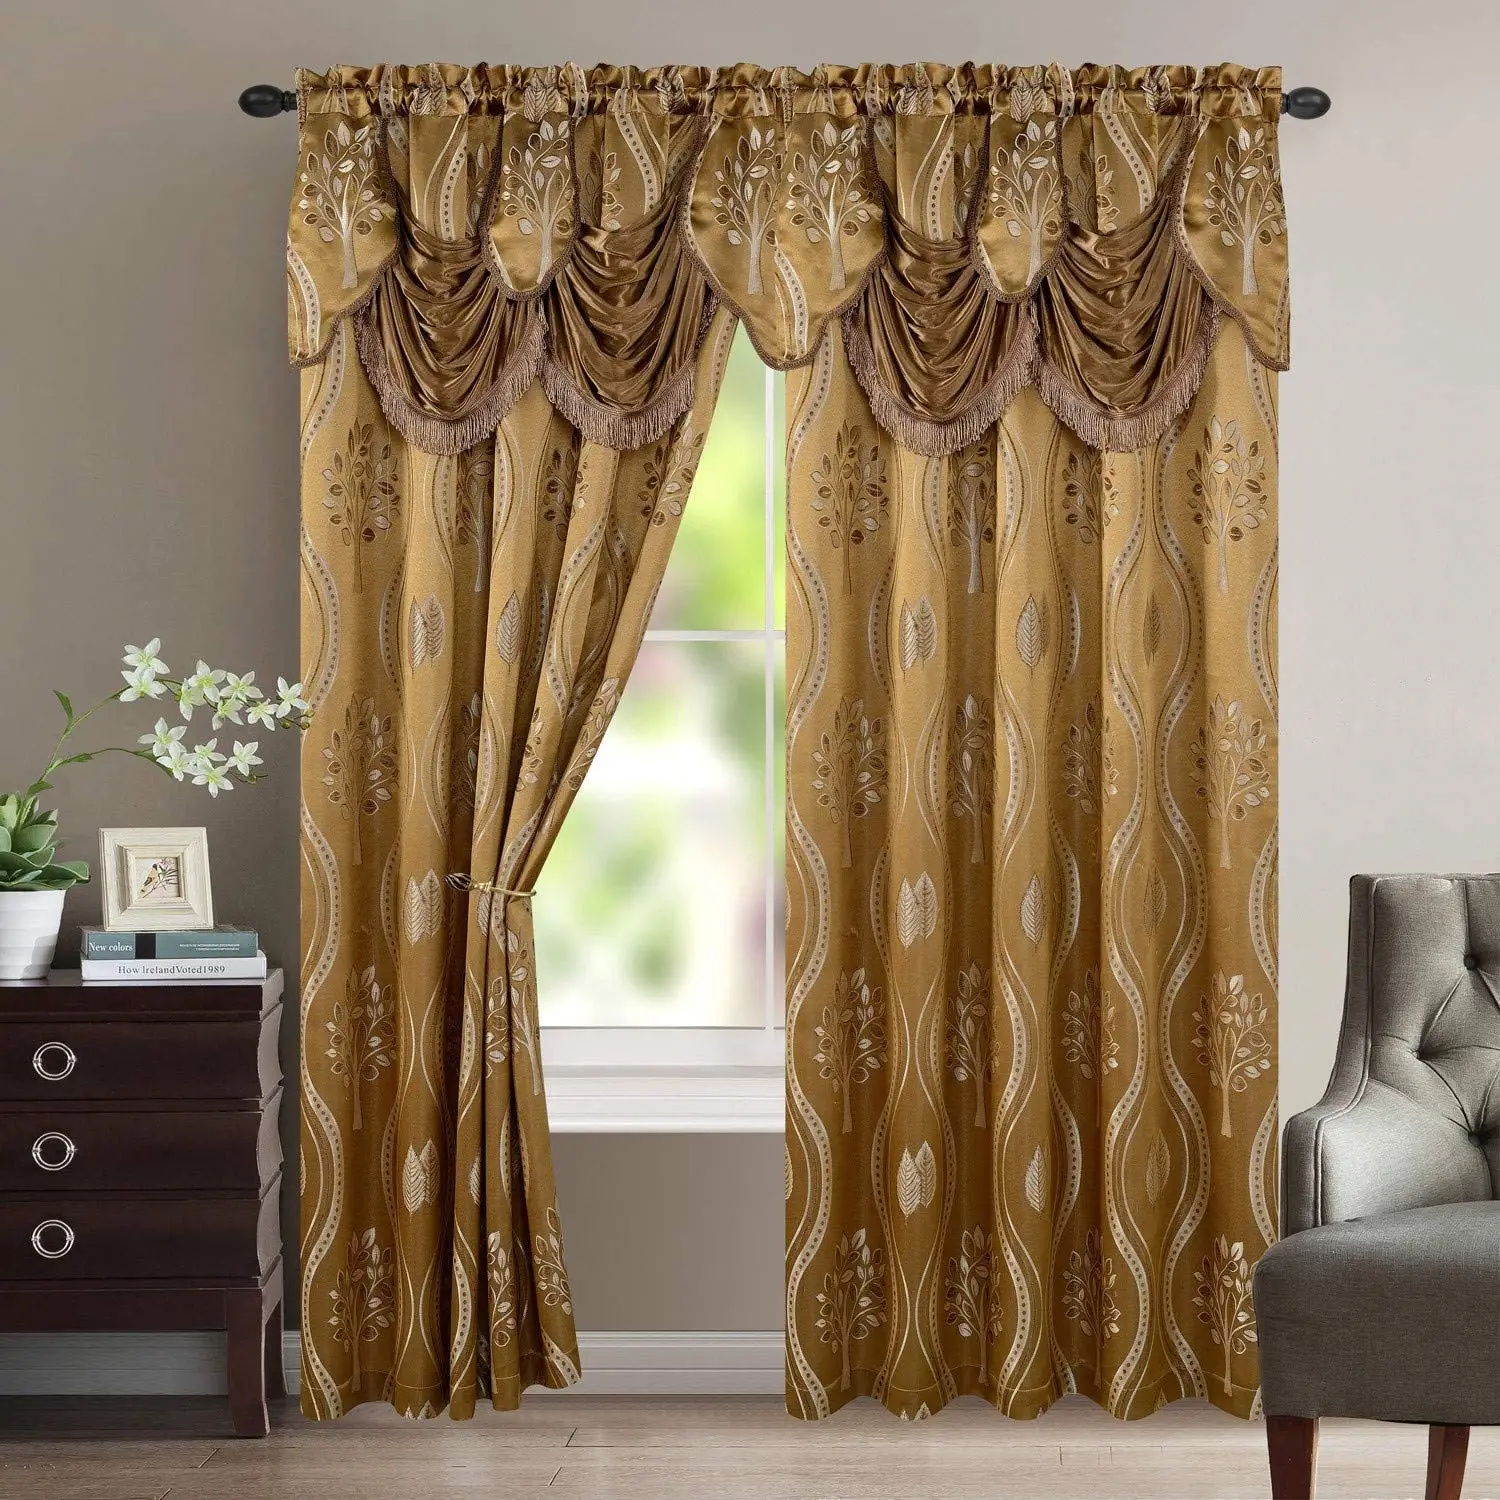 Free sample curtain design,decor living room jacquard curtain with attached valance